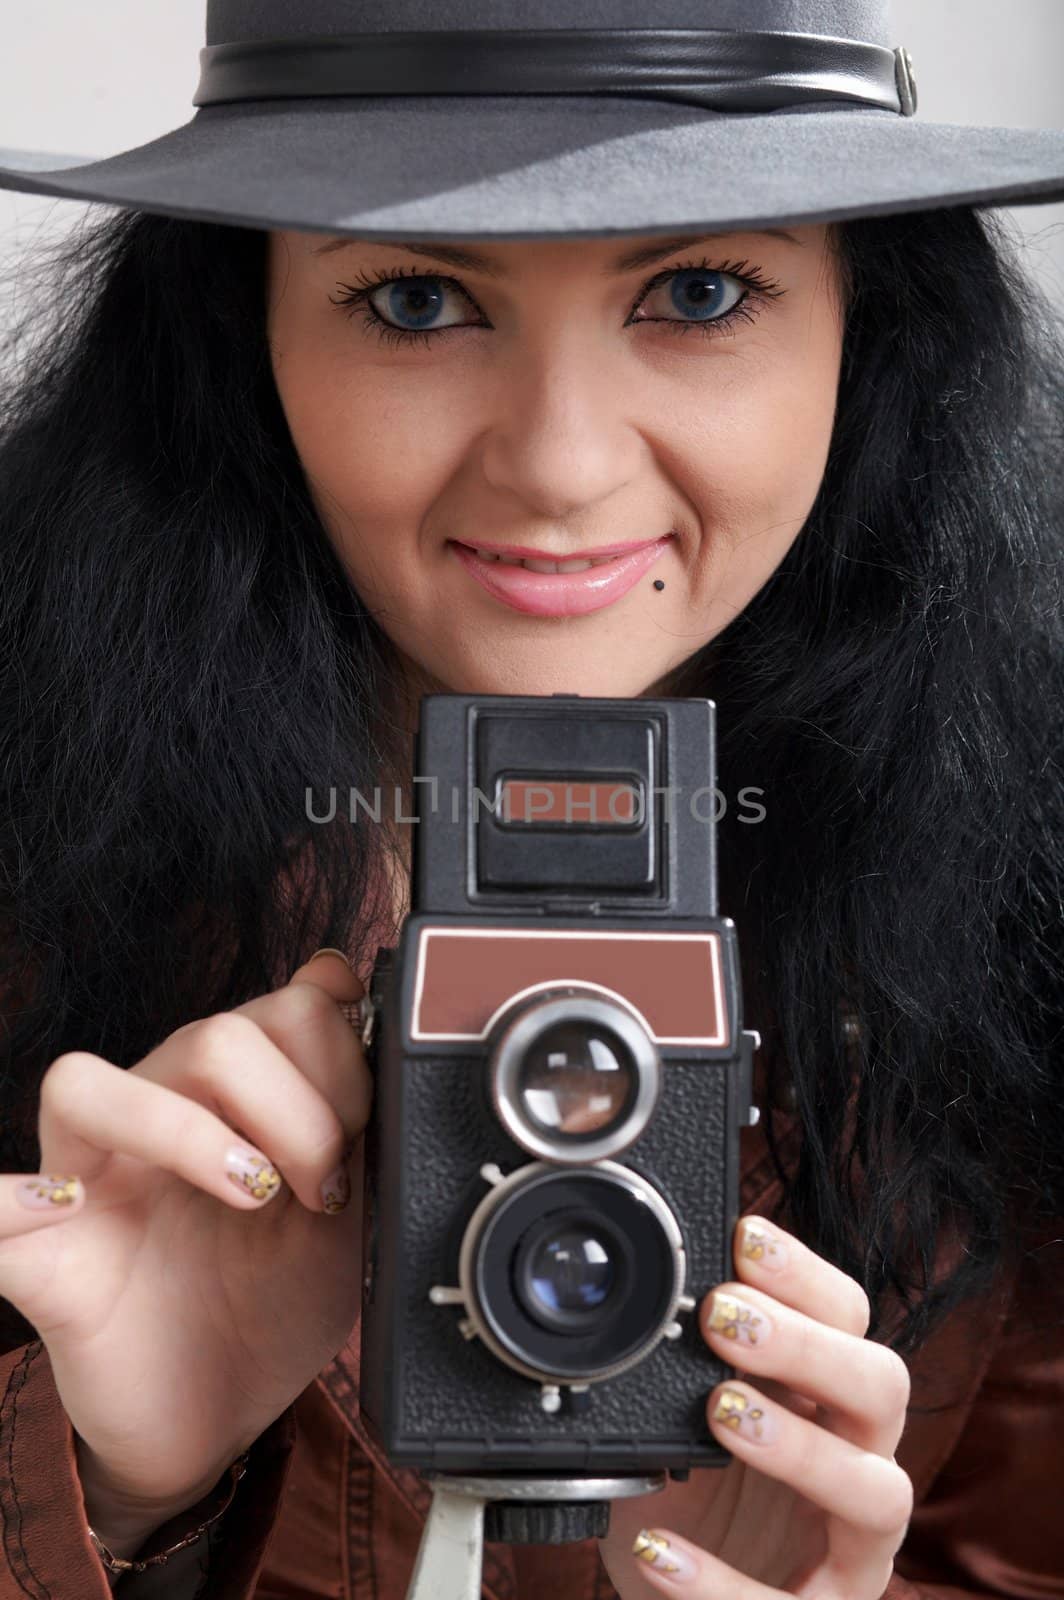 An image of a nice girl with camera